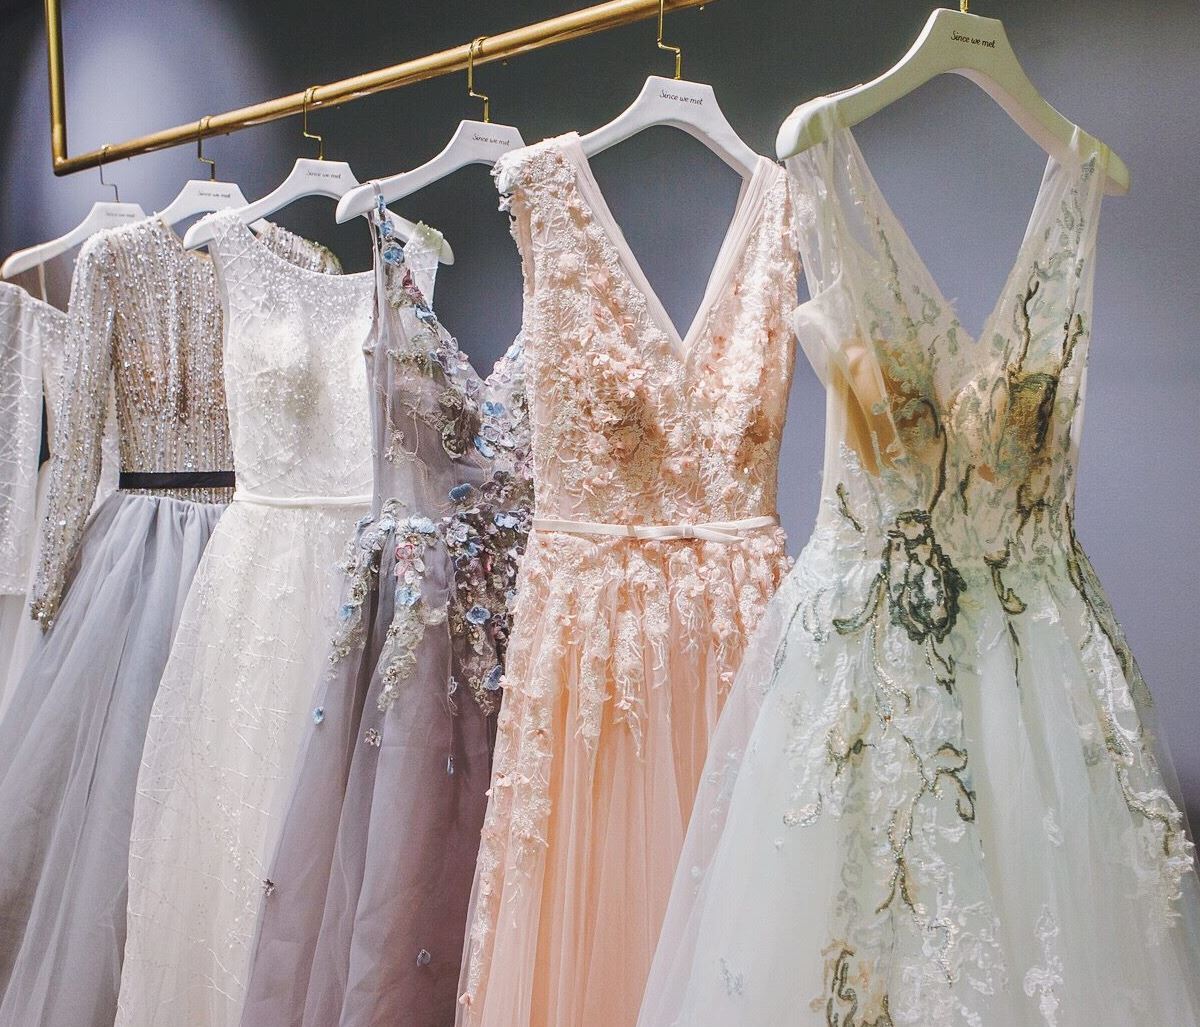 What NOT to do after buying your wedding dress